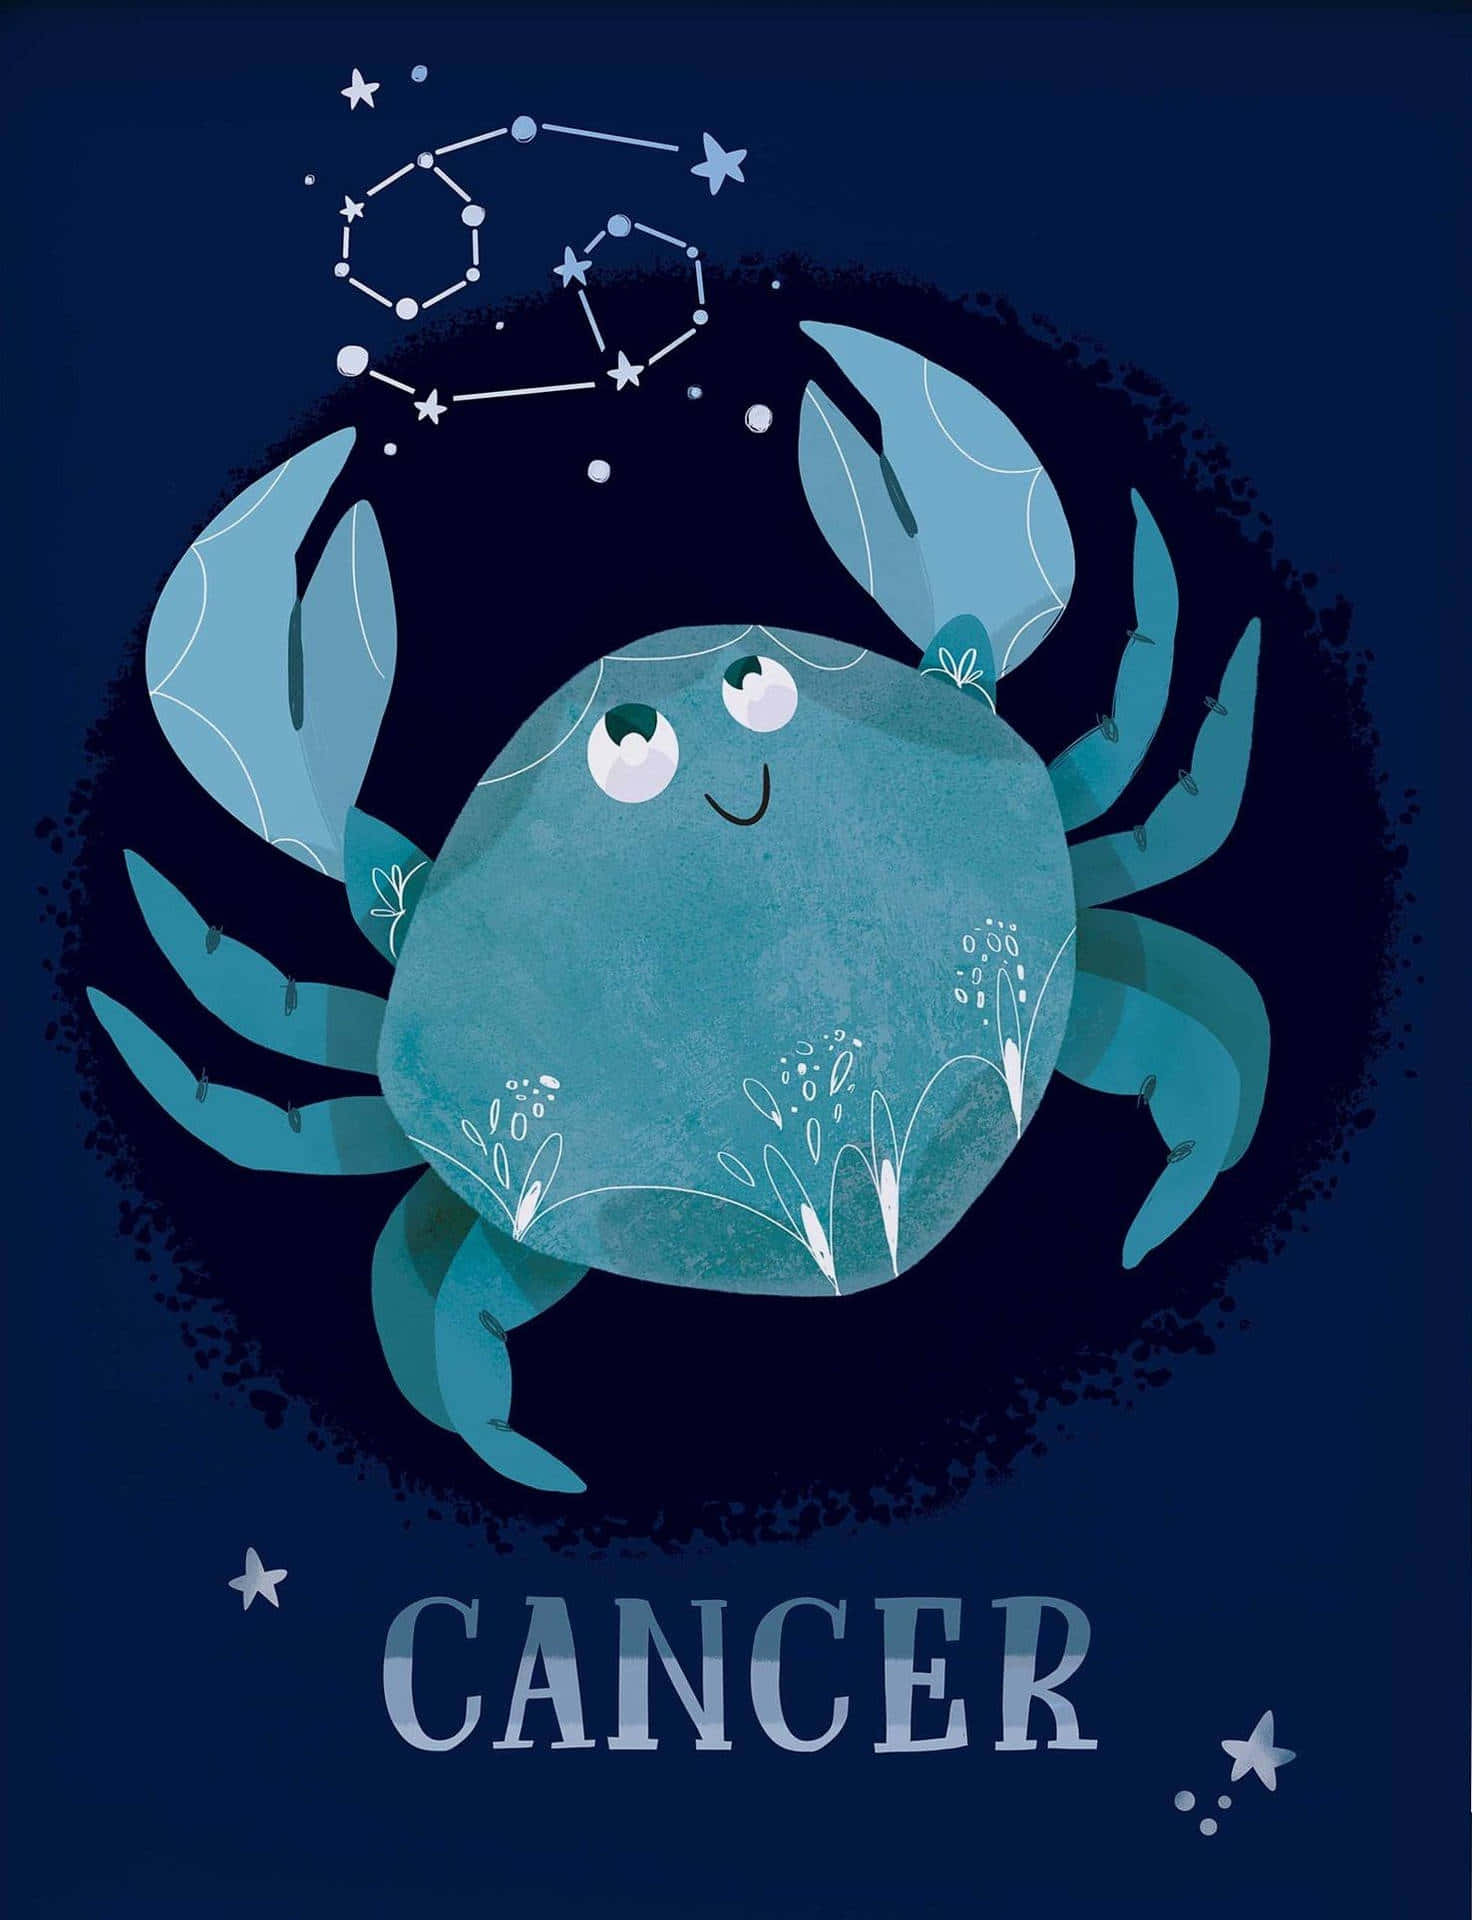 "Adorably Charming Illustration of the Cancer Zodiac Sign as a Cute Sea Crab" Wallpaper